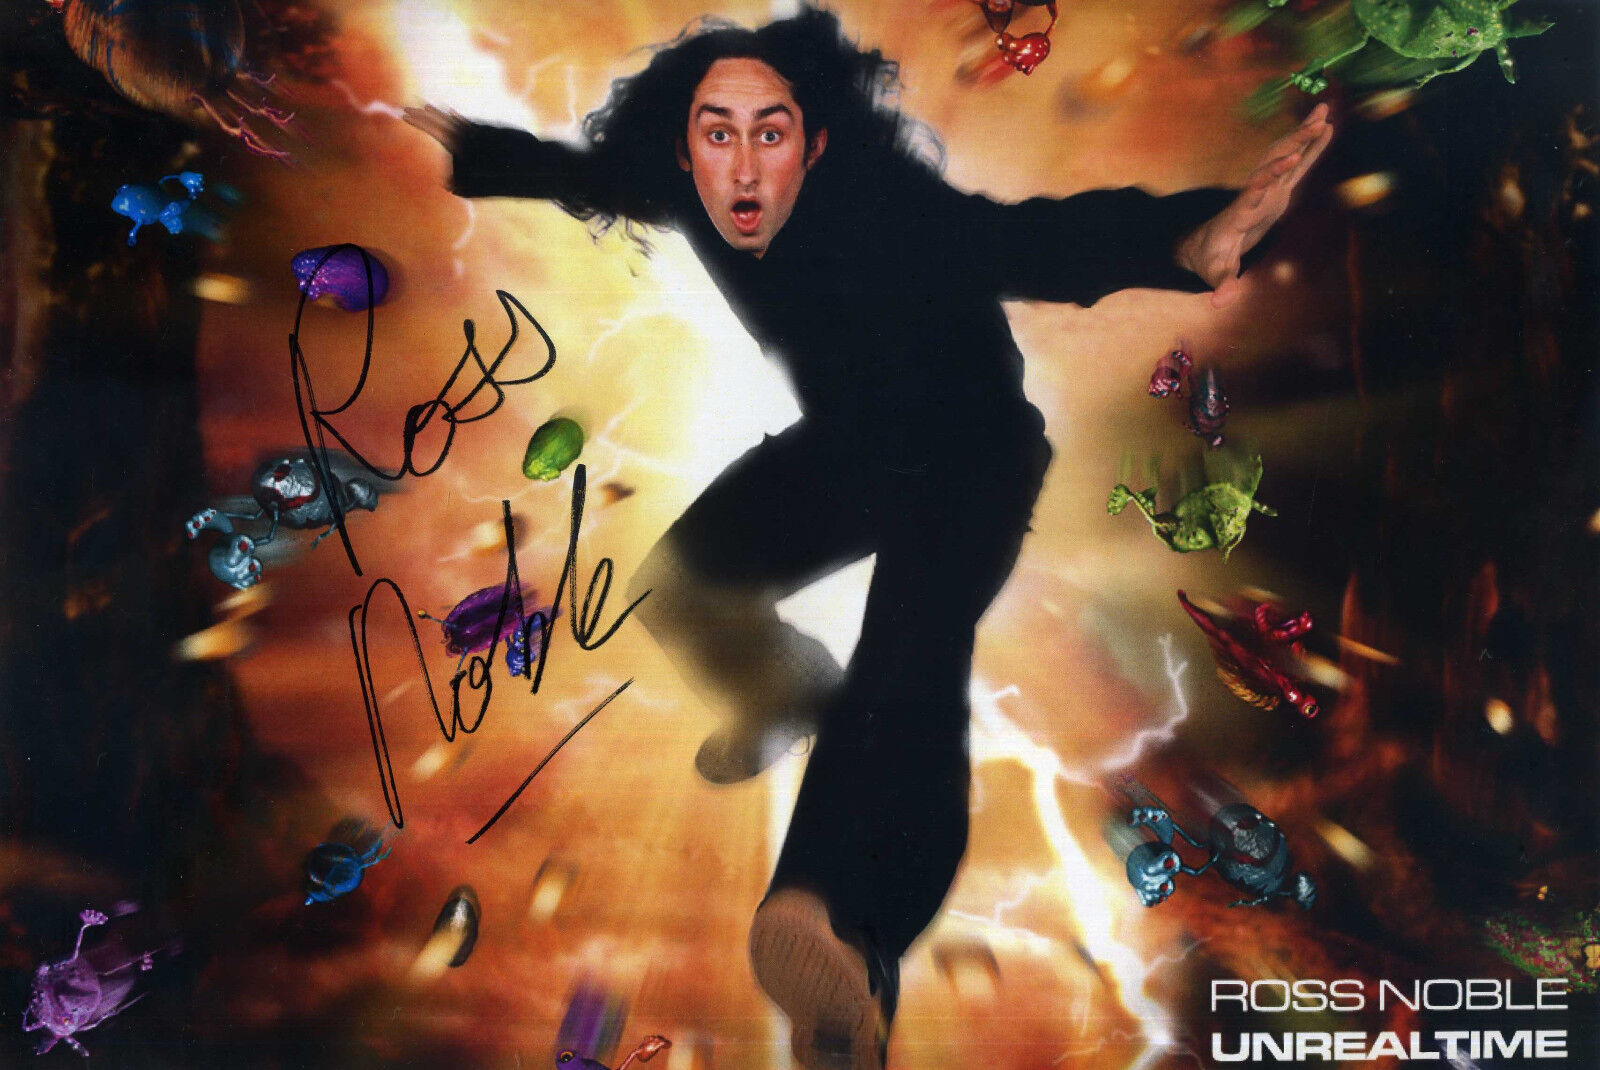 ROSS NOBLE Signed Photo Poster paintinggraph - TV Star / Comedian - preprint